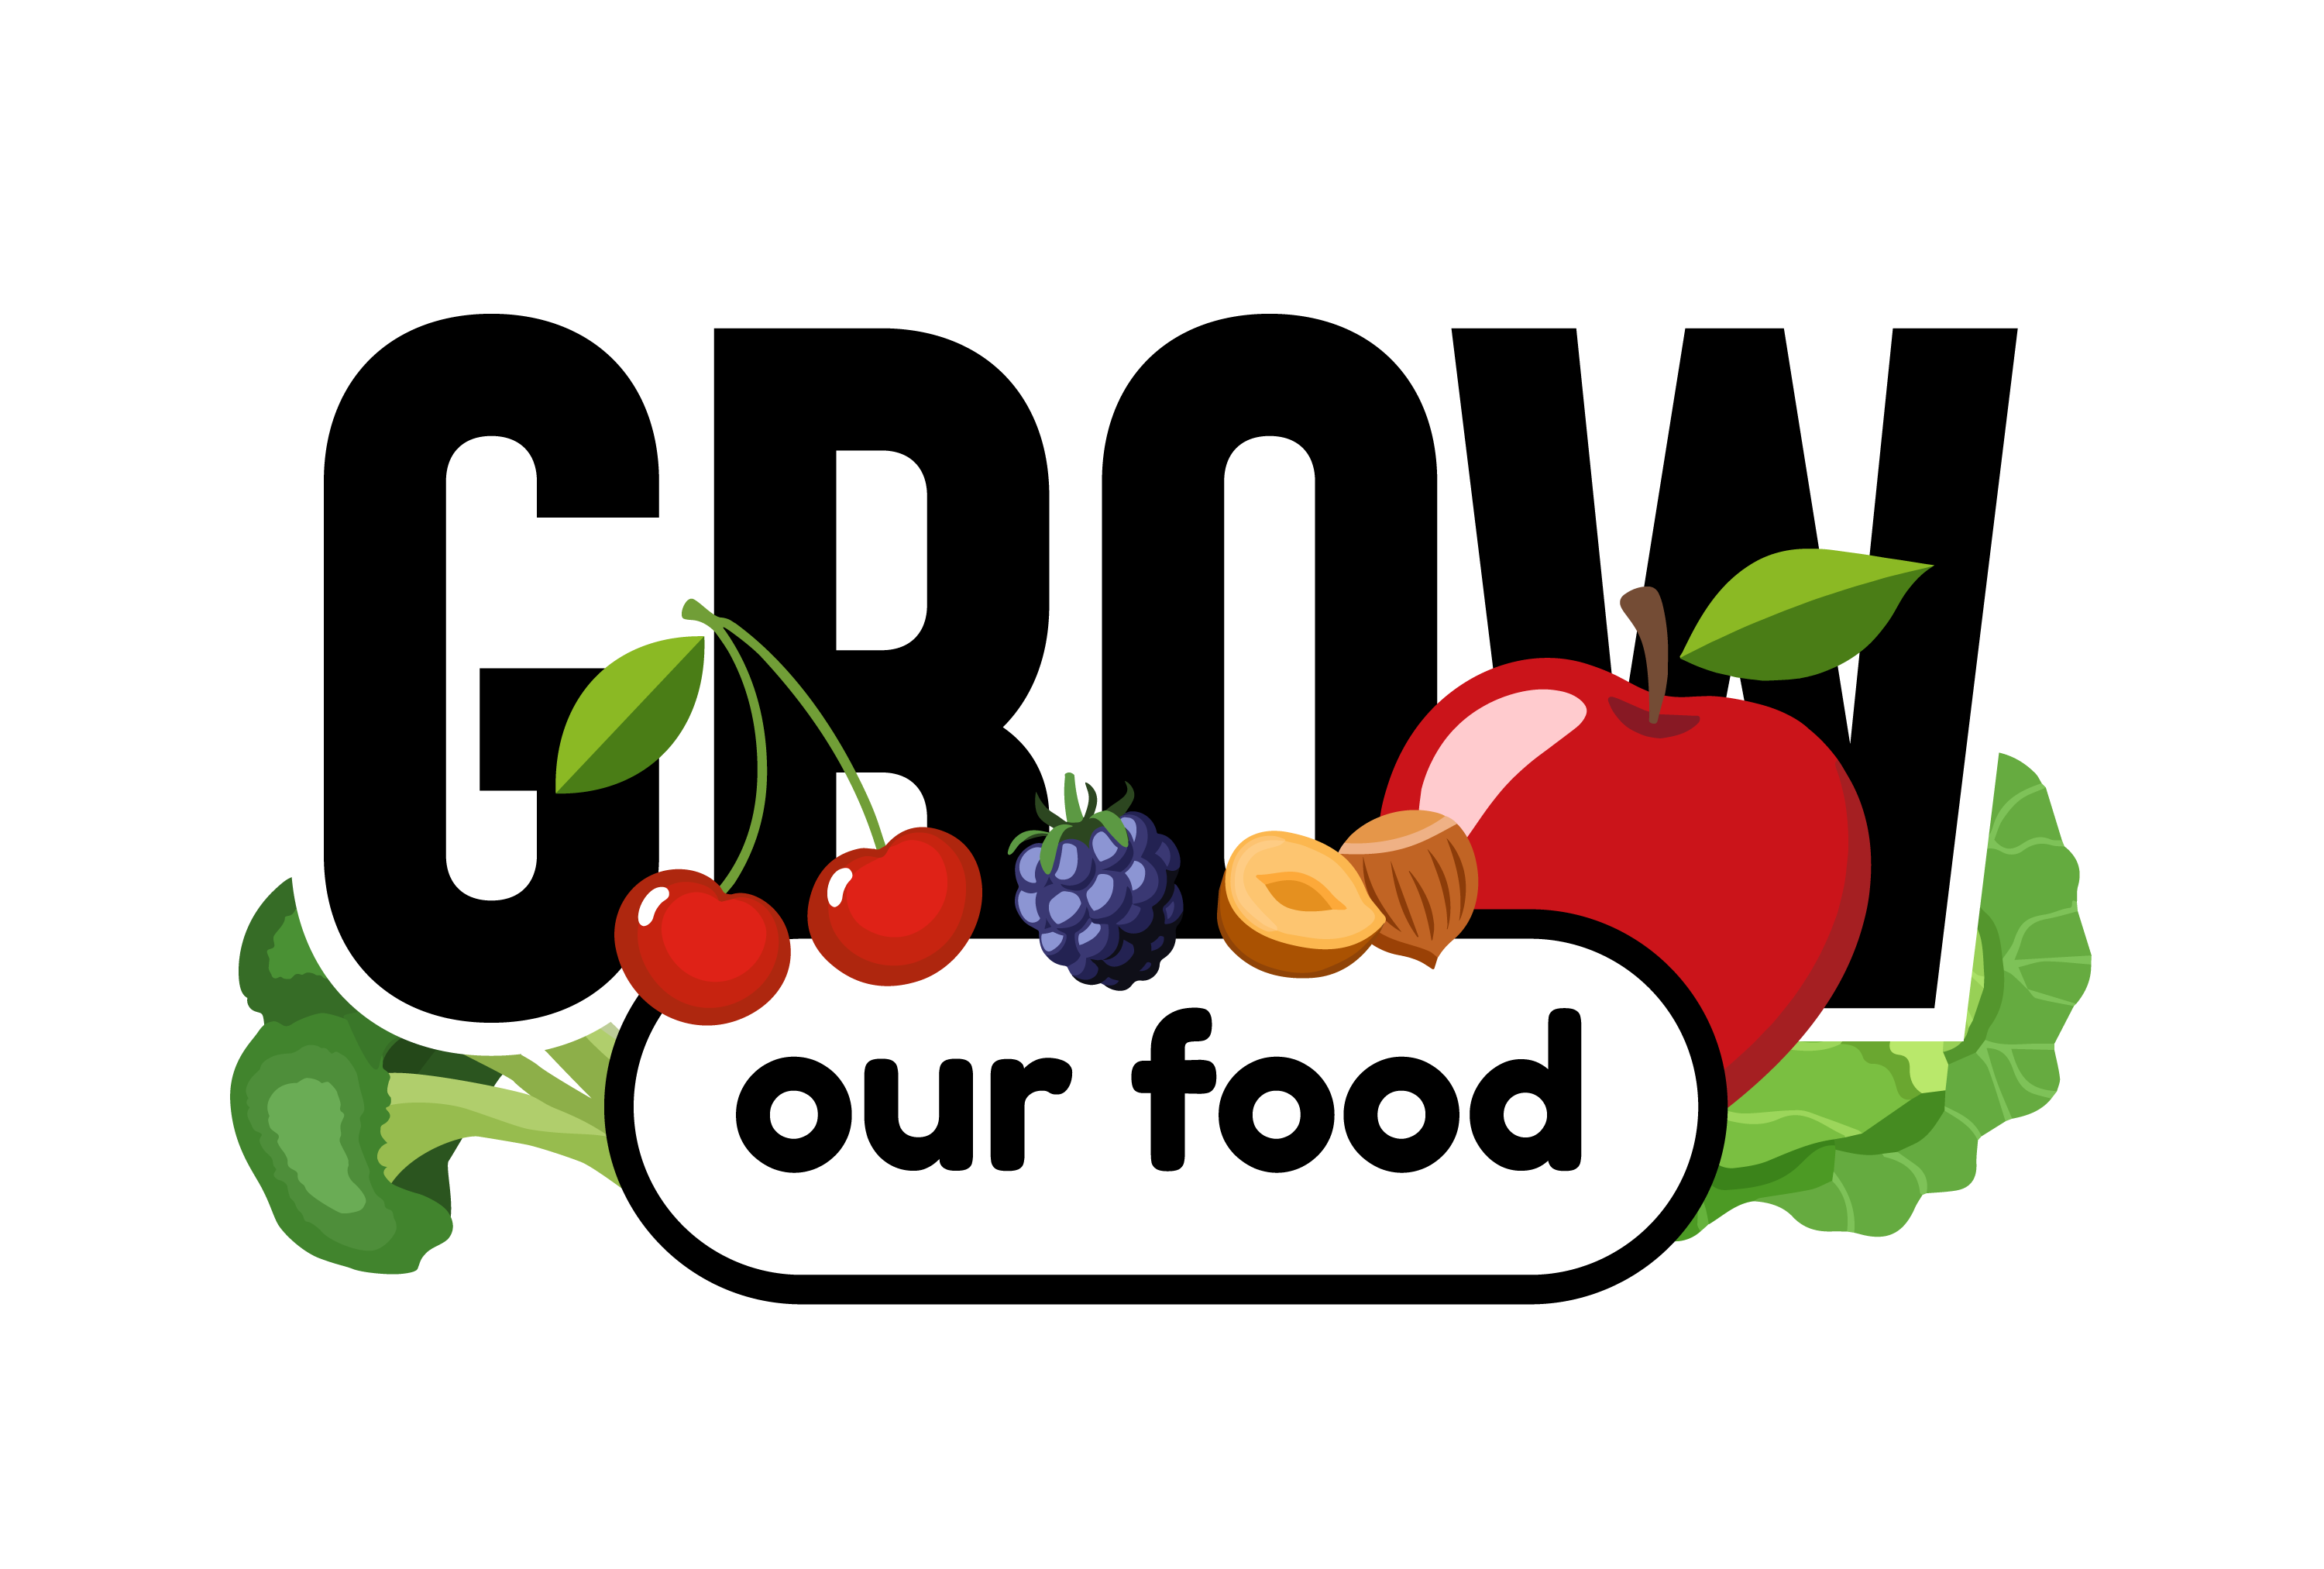 Member to Member Webinar with Grow our Food